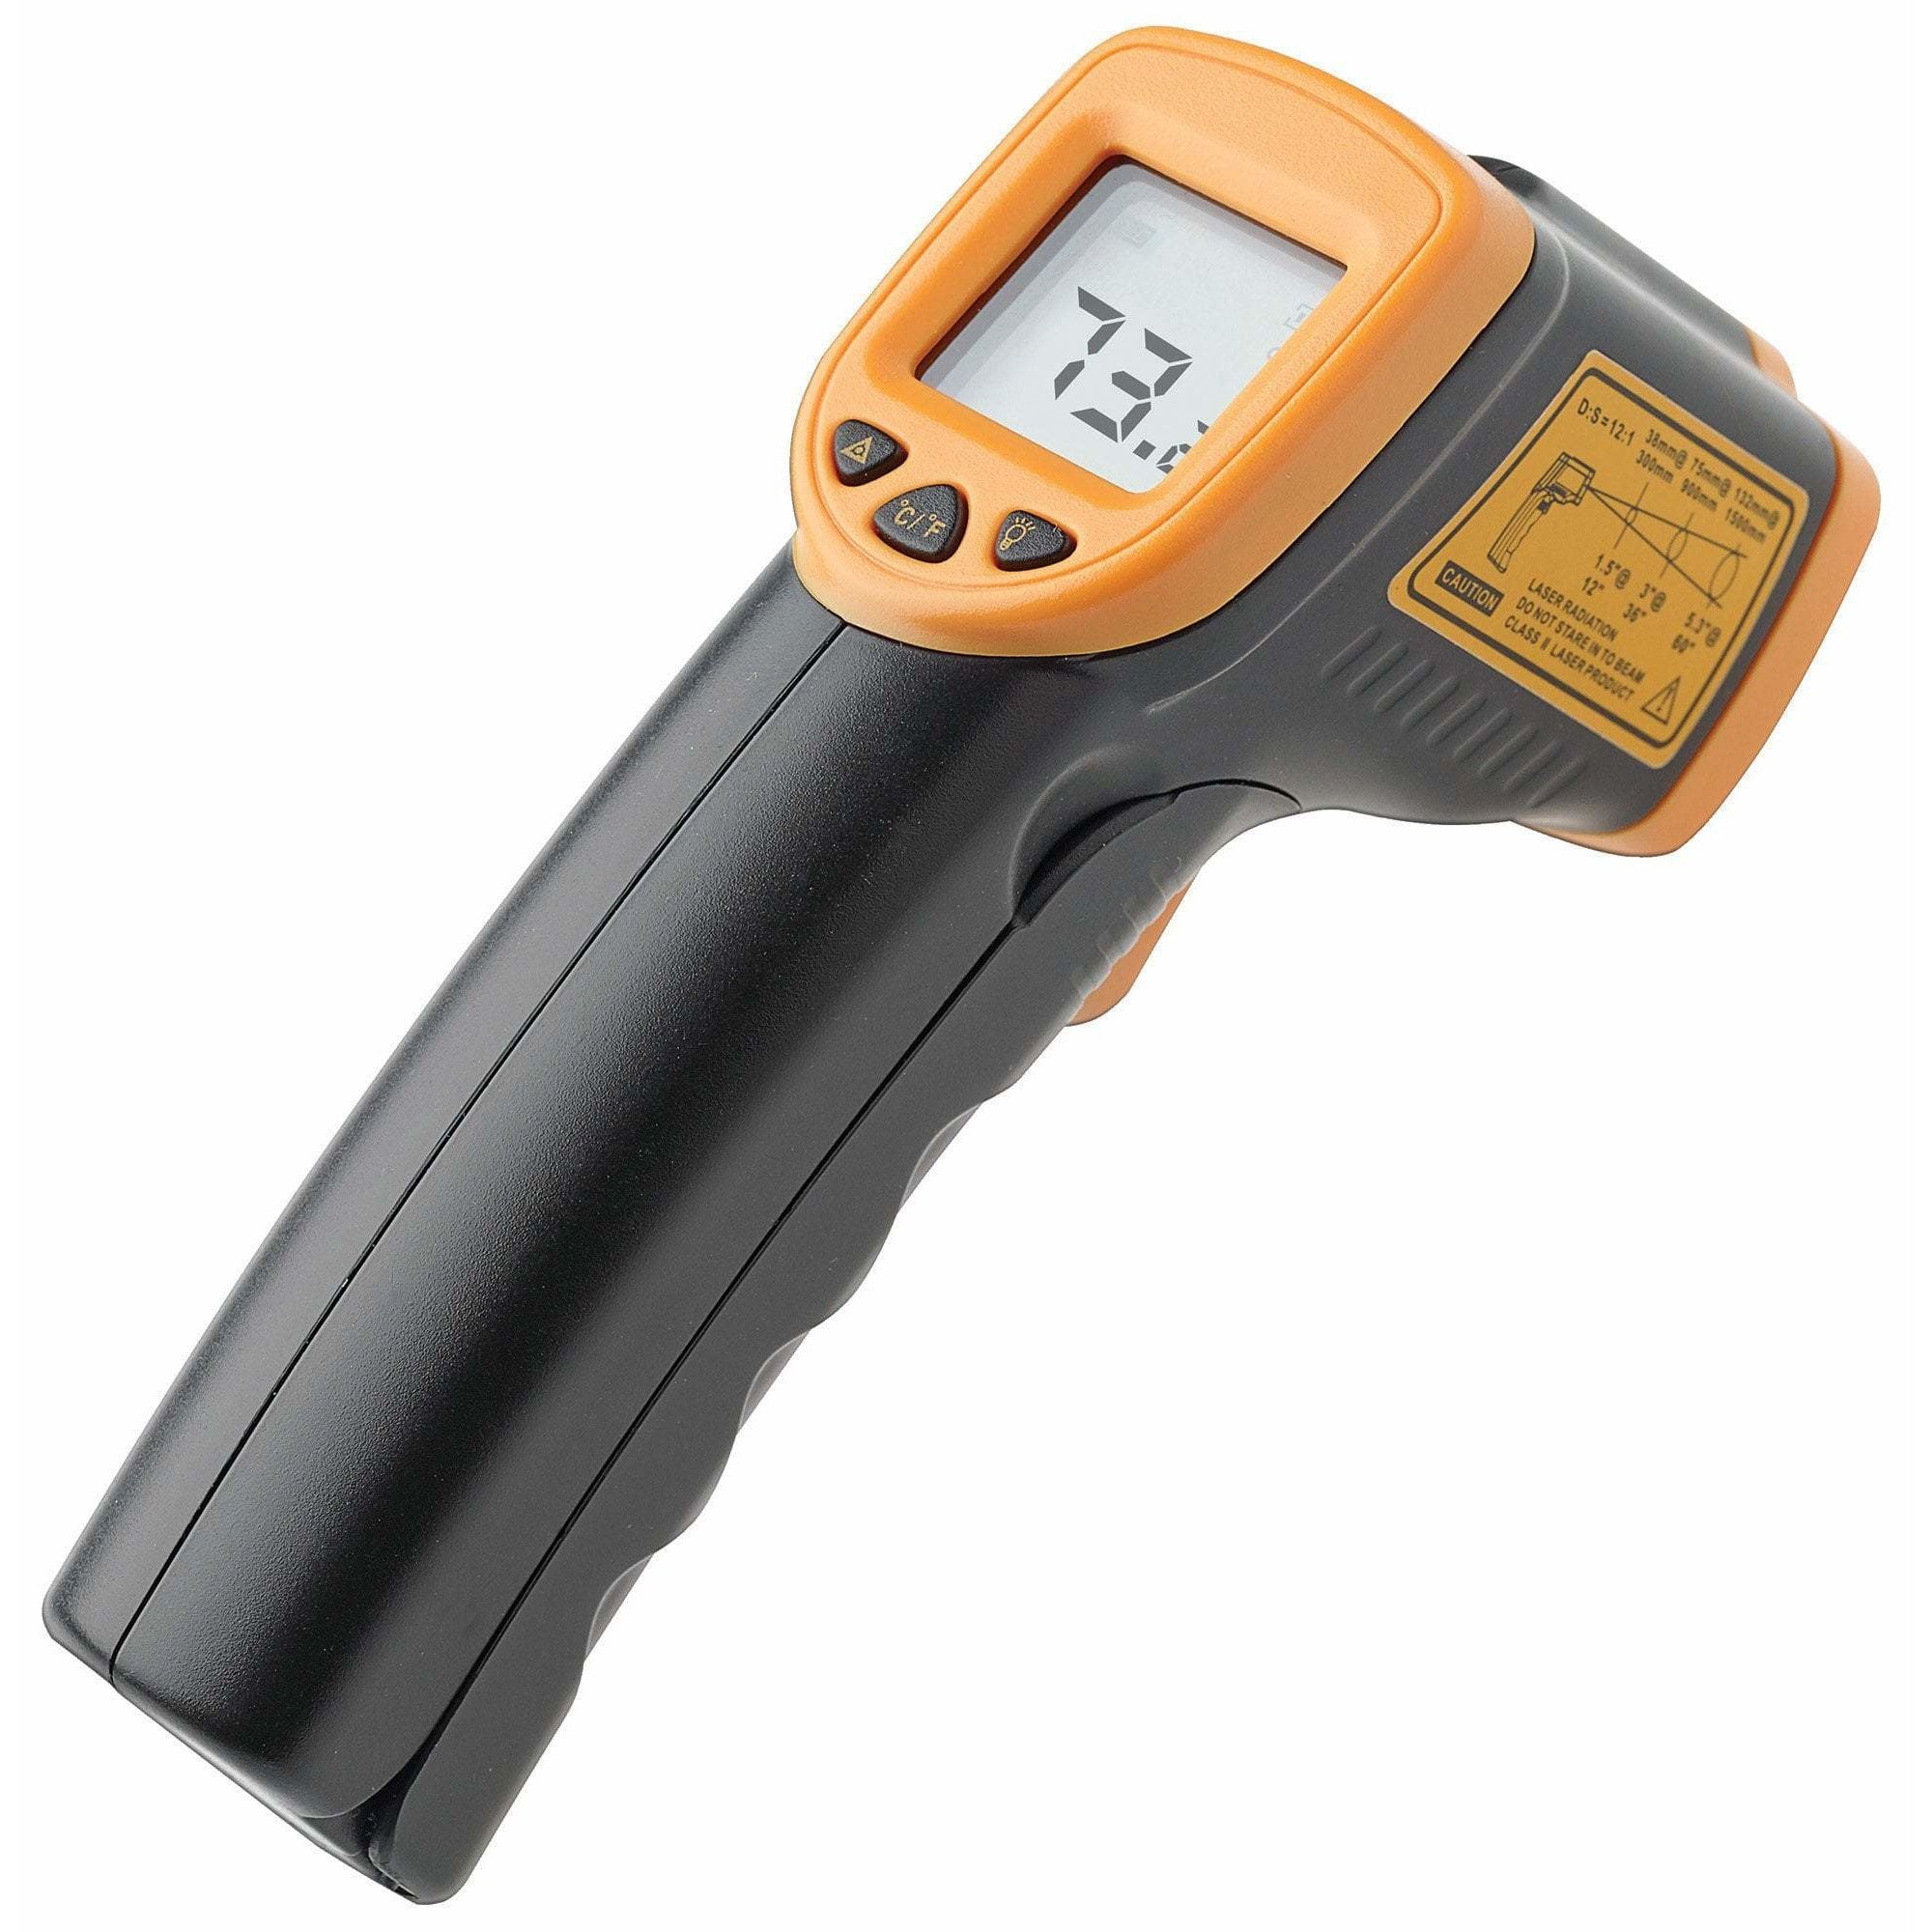 Winco - TMT-IF1 - Infrared Thermometer Food Preparation